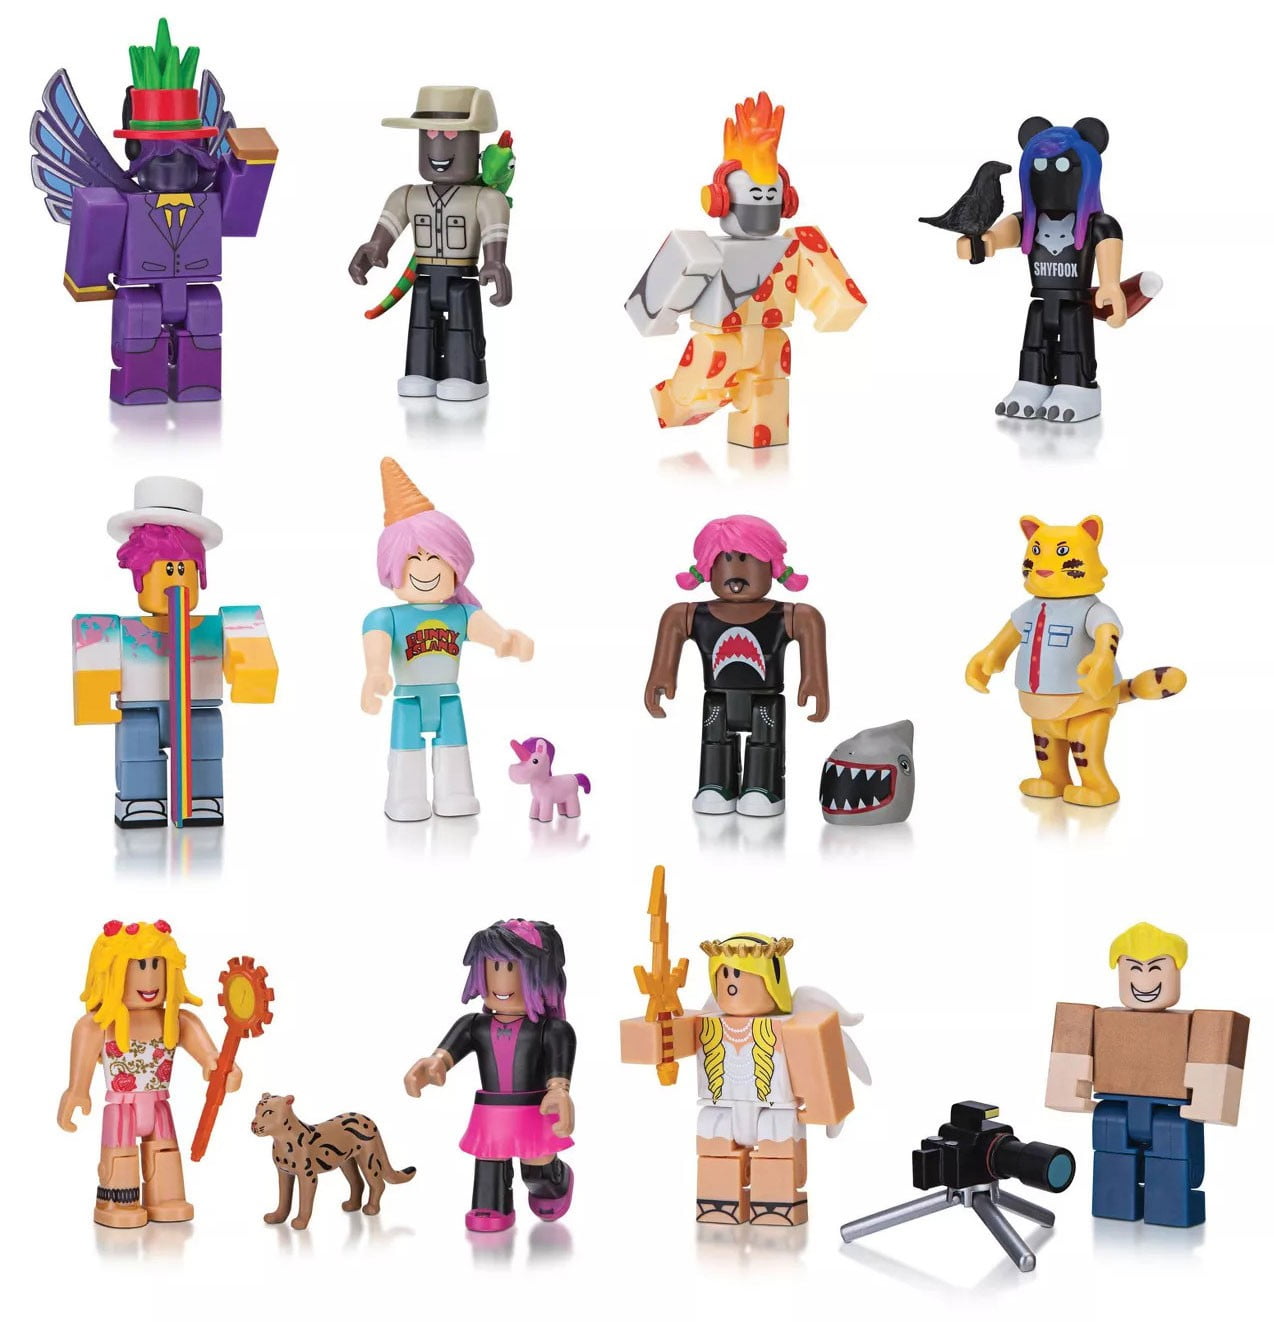 Roblox Series 2 Celebrity Collection Figure 12 Pack Set Walmart - roblox series 2 celebrity collection figure 12 pack set walmart